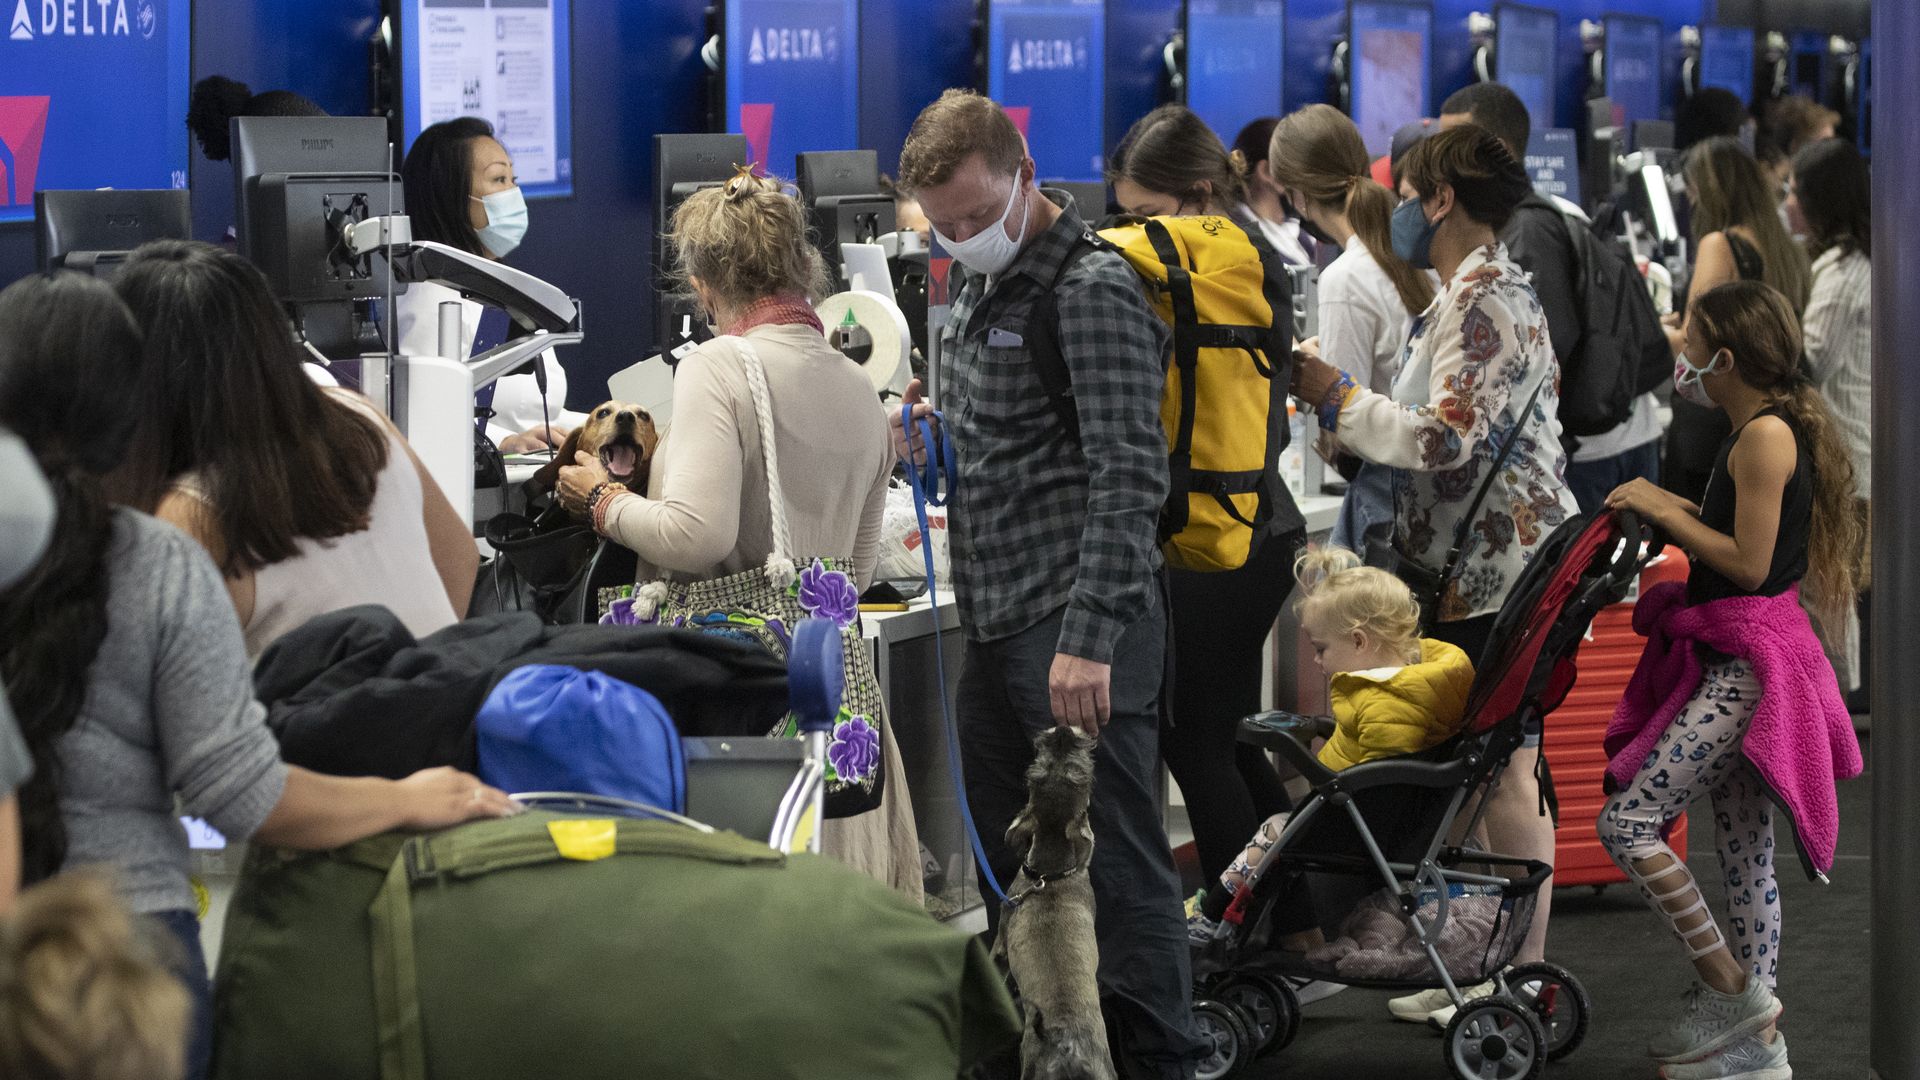 Image of crowded check-in with masked passengers at Los Angeles airport